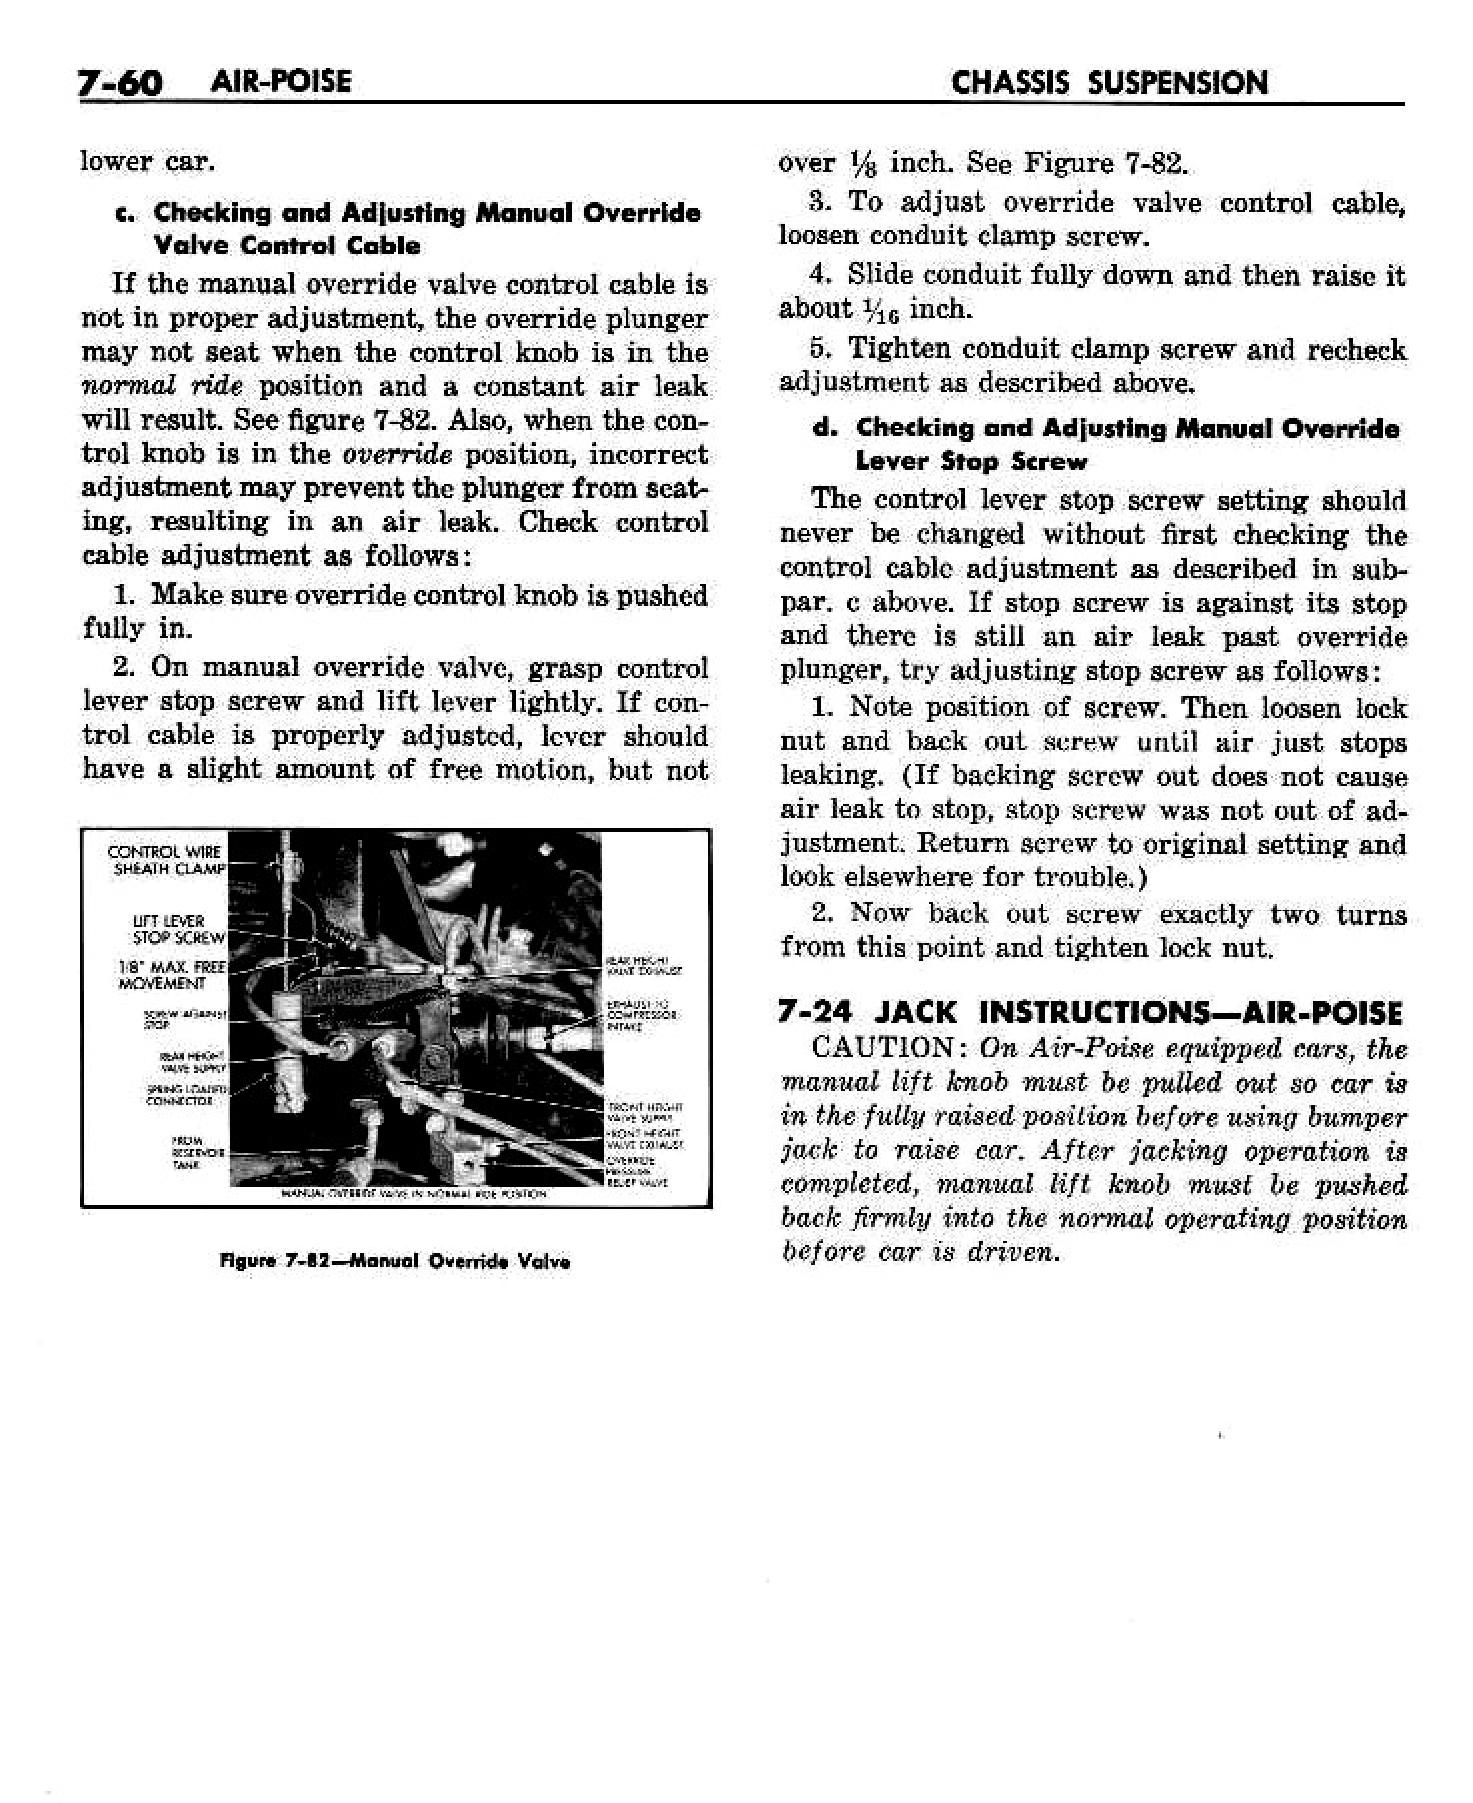 n_08 1958 Buick Shop Manual - Chassis Suspension_60.jpg